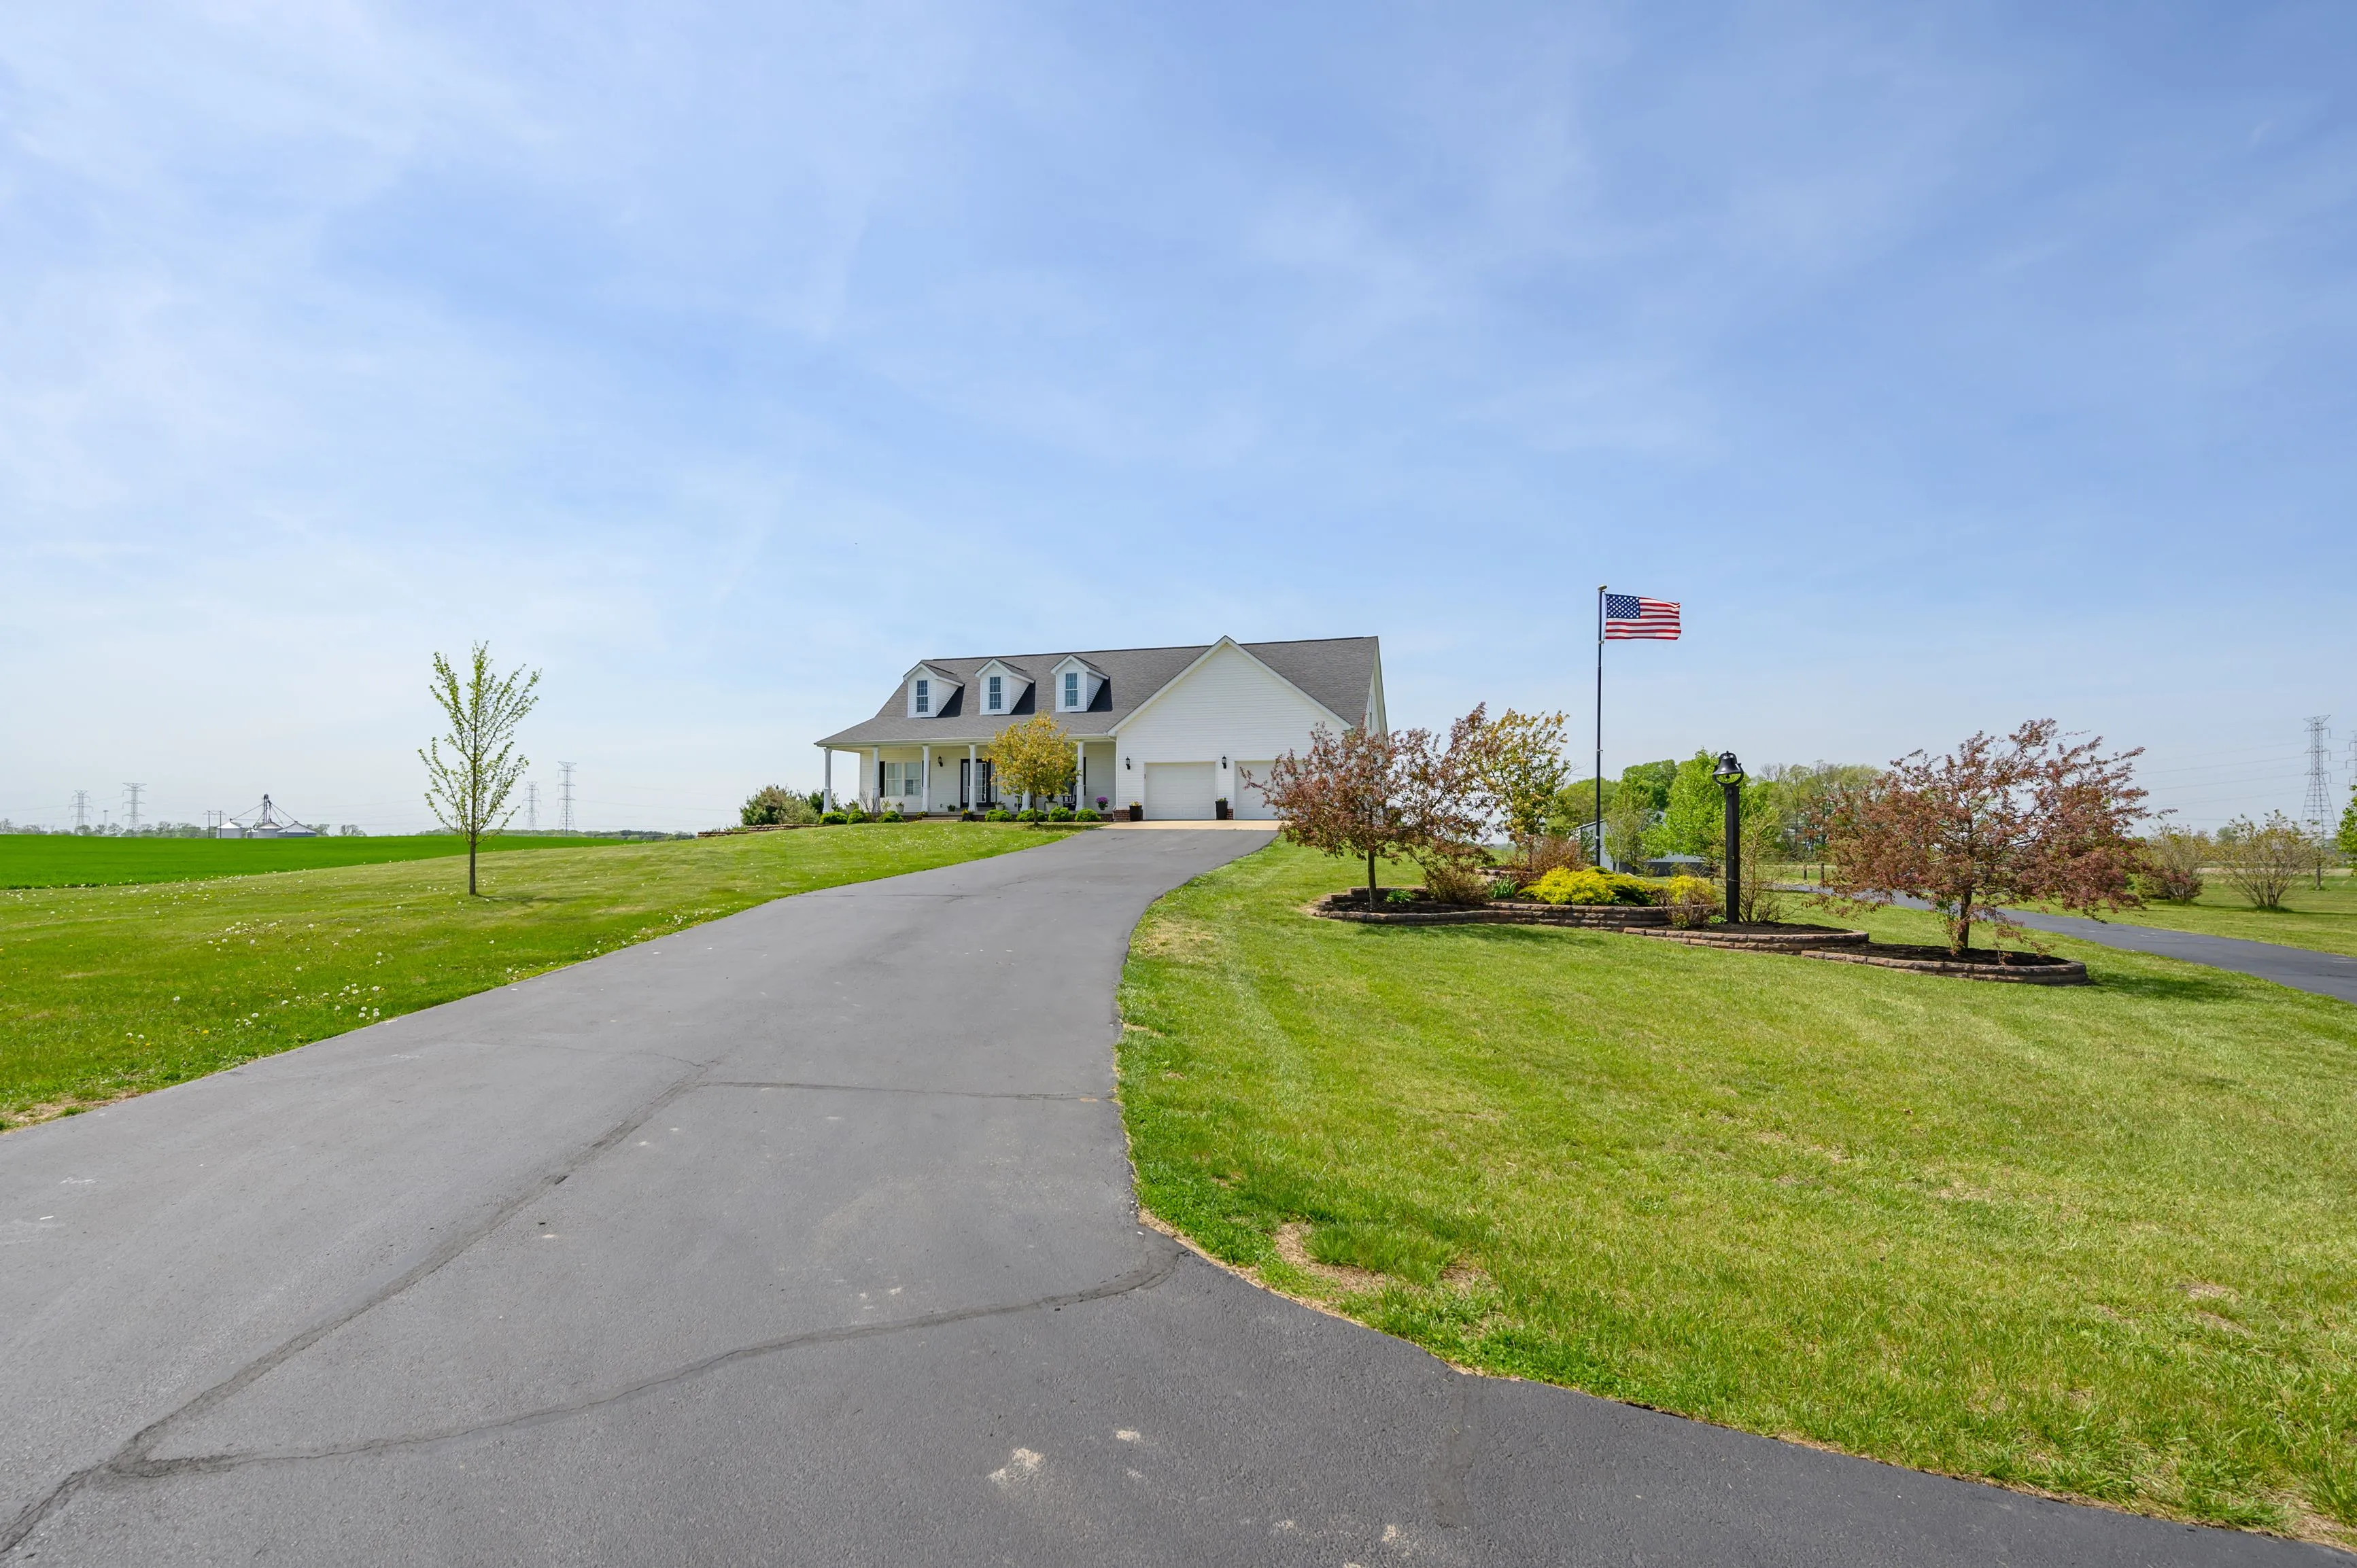 Curved driveway leading to a large house with an American flag under a clear blue sky.